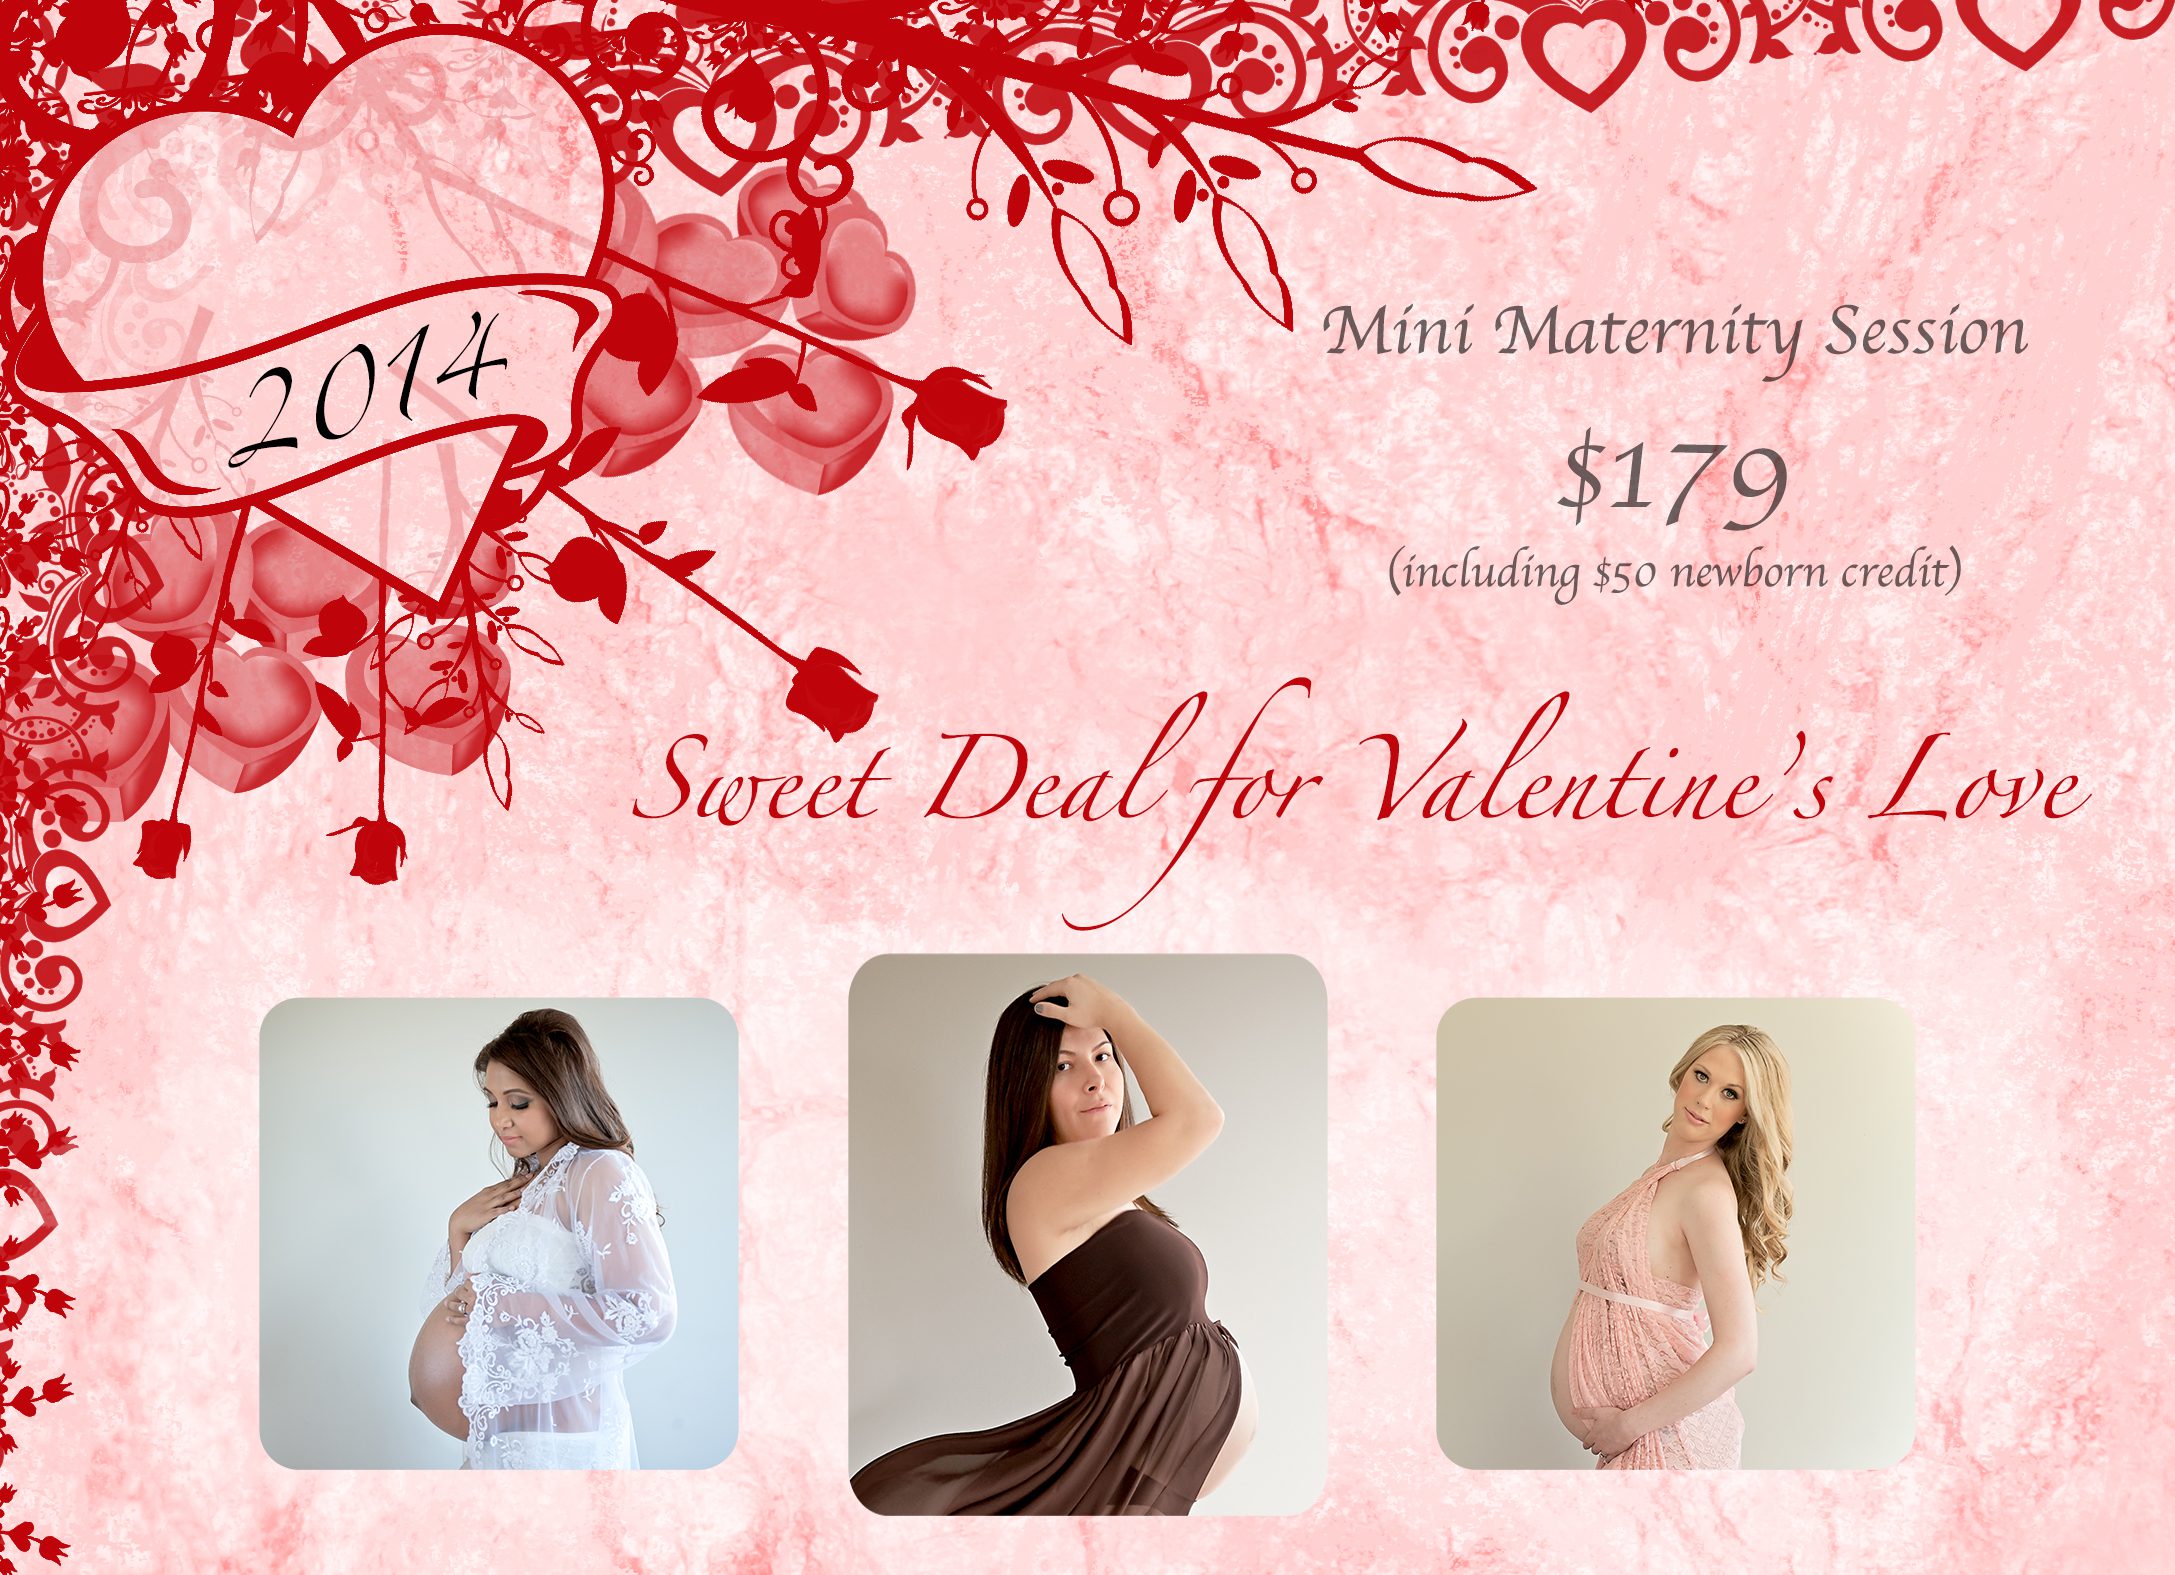 Maternity Photography Vancouver| Mini Maternity Session - New High Glass Inc